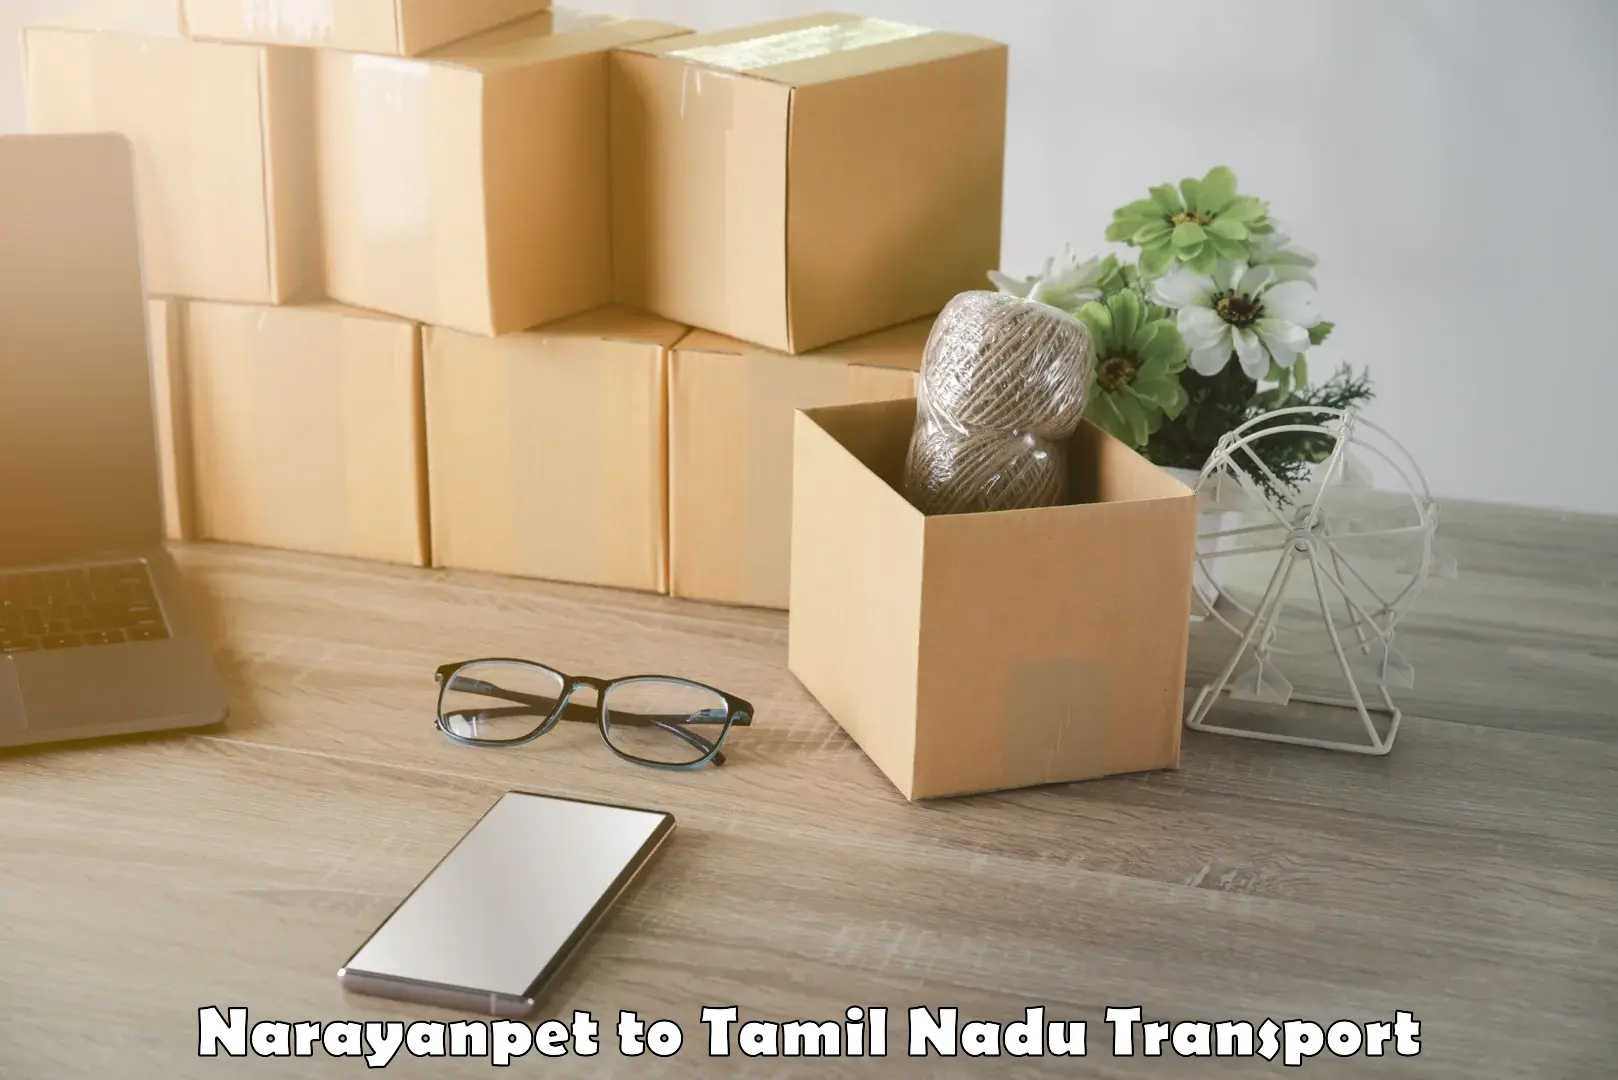 Goods delivery service Narayanpet to Ulundurpet